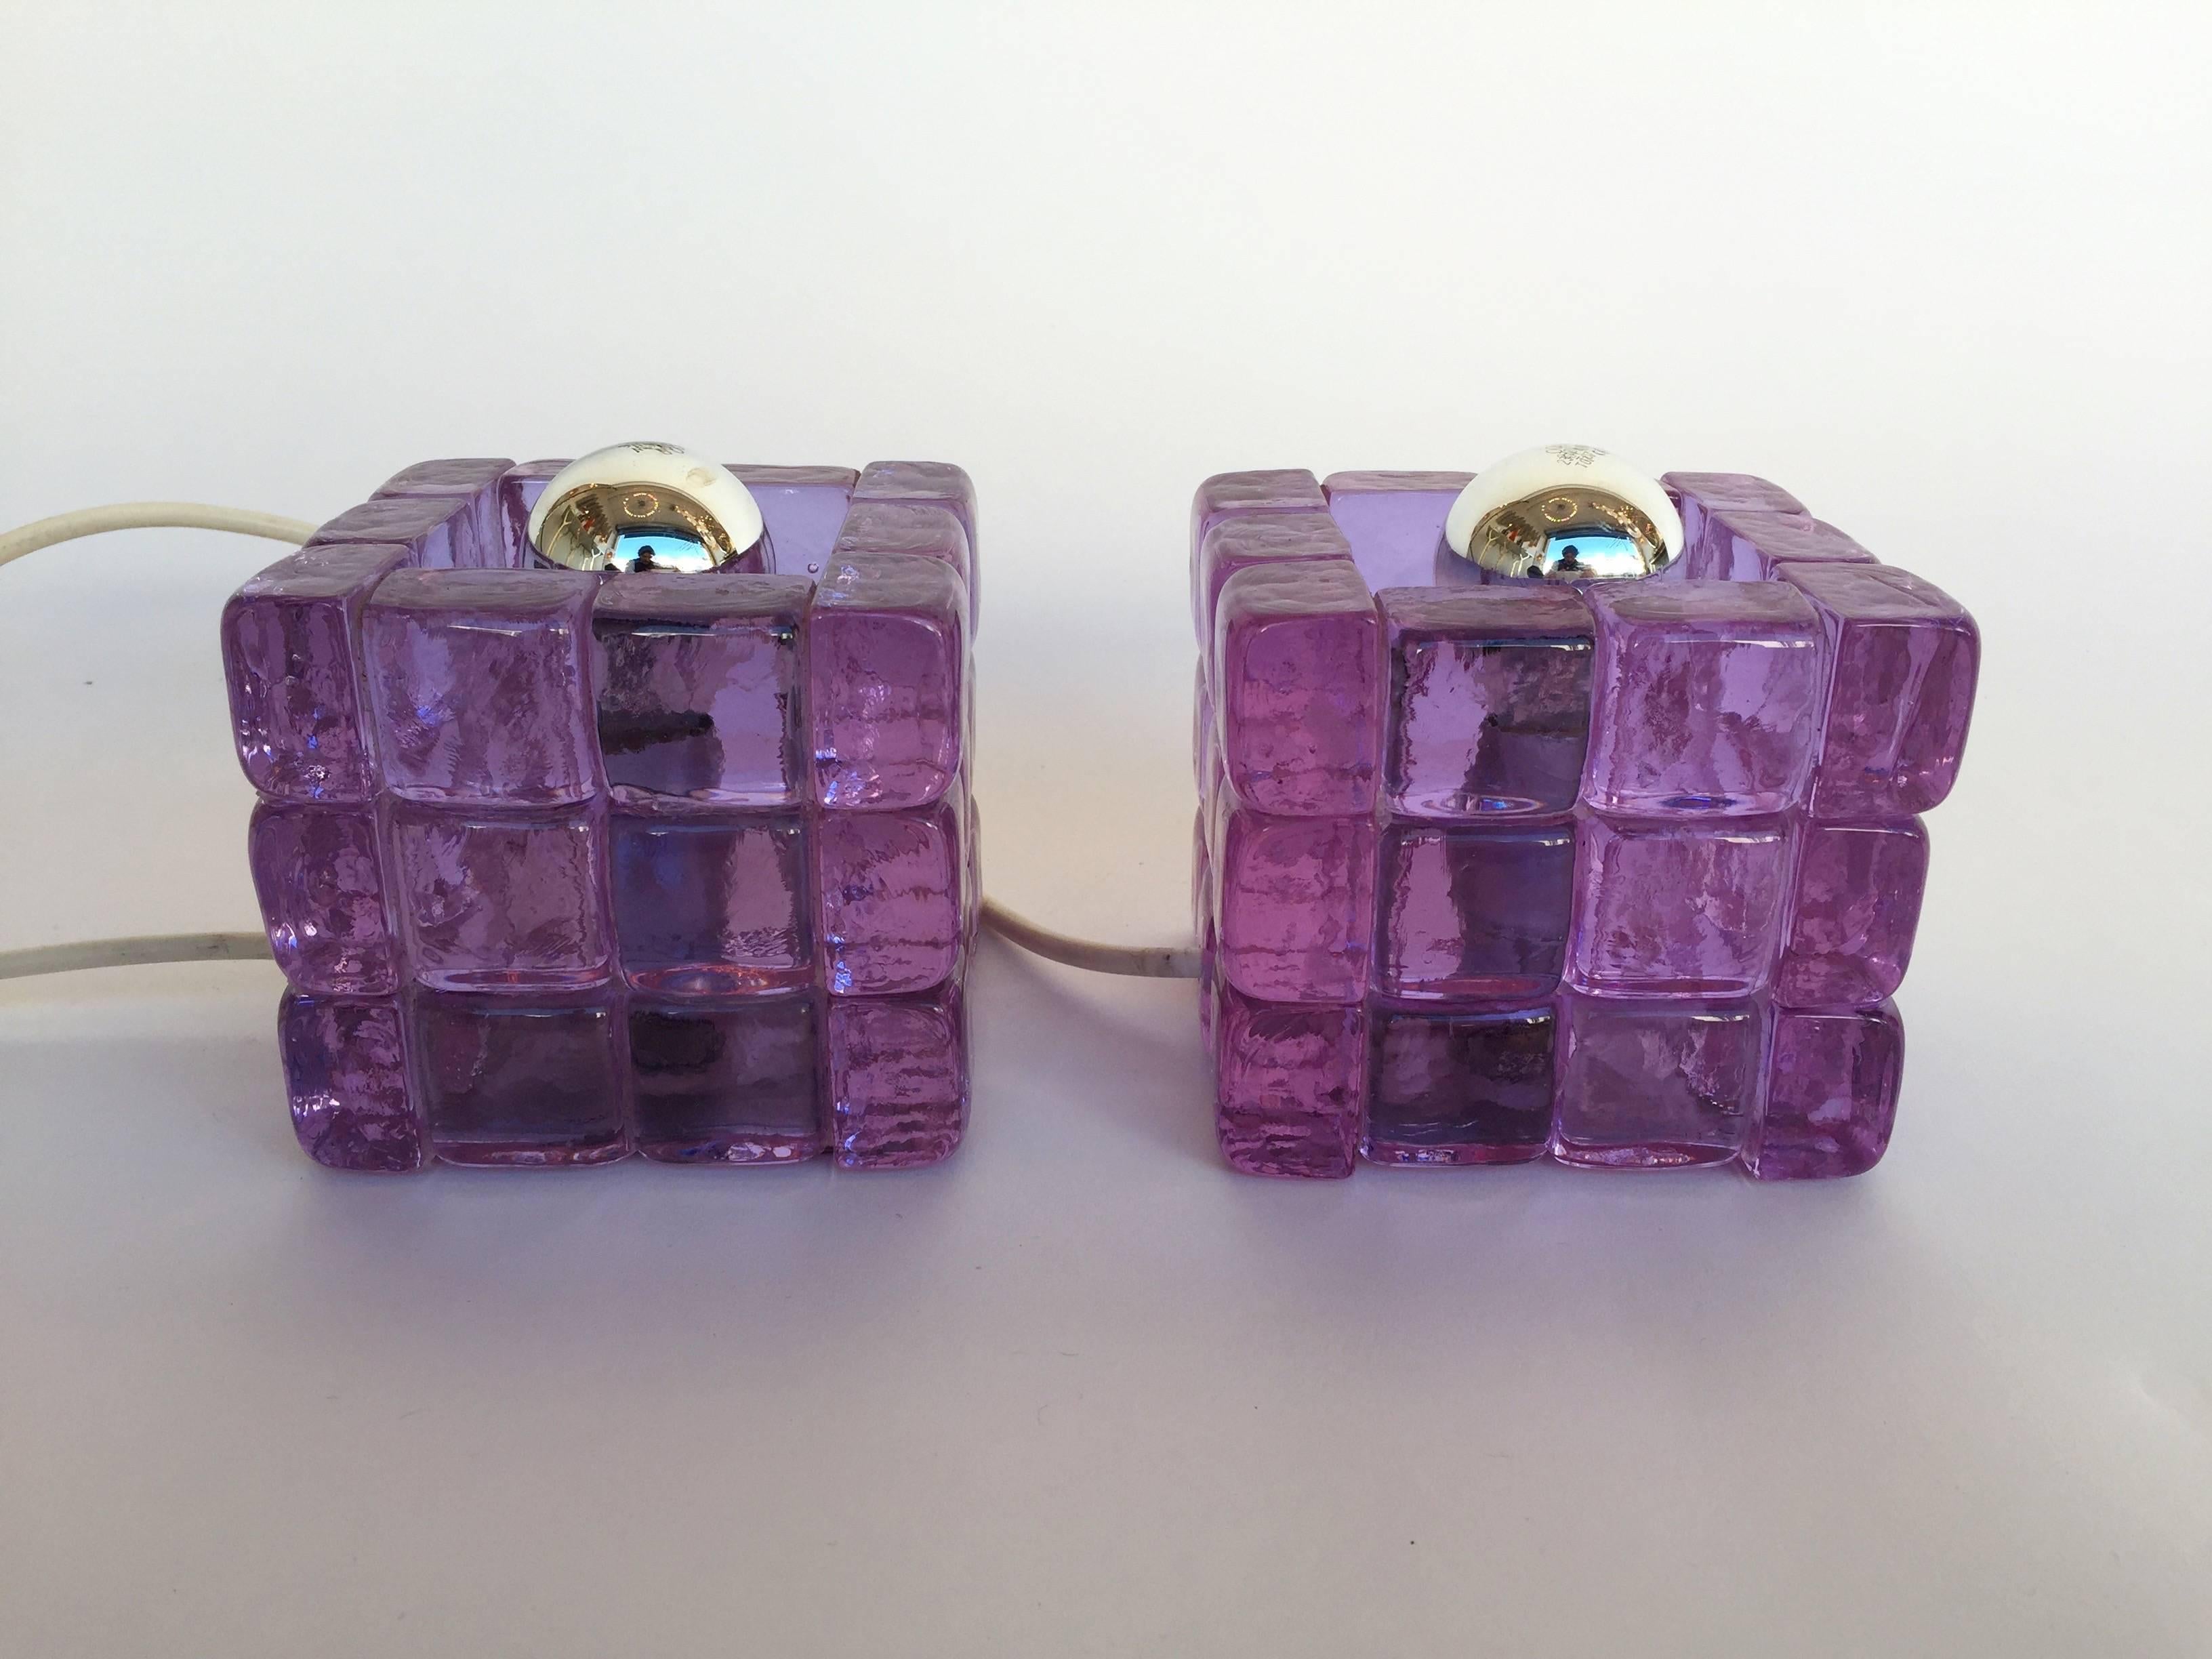 Pressed Pair of Cube Lamps by Poliarte, Italy, 1970s